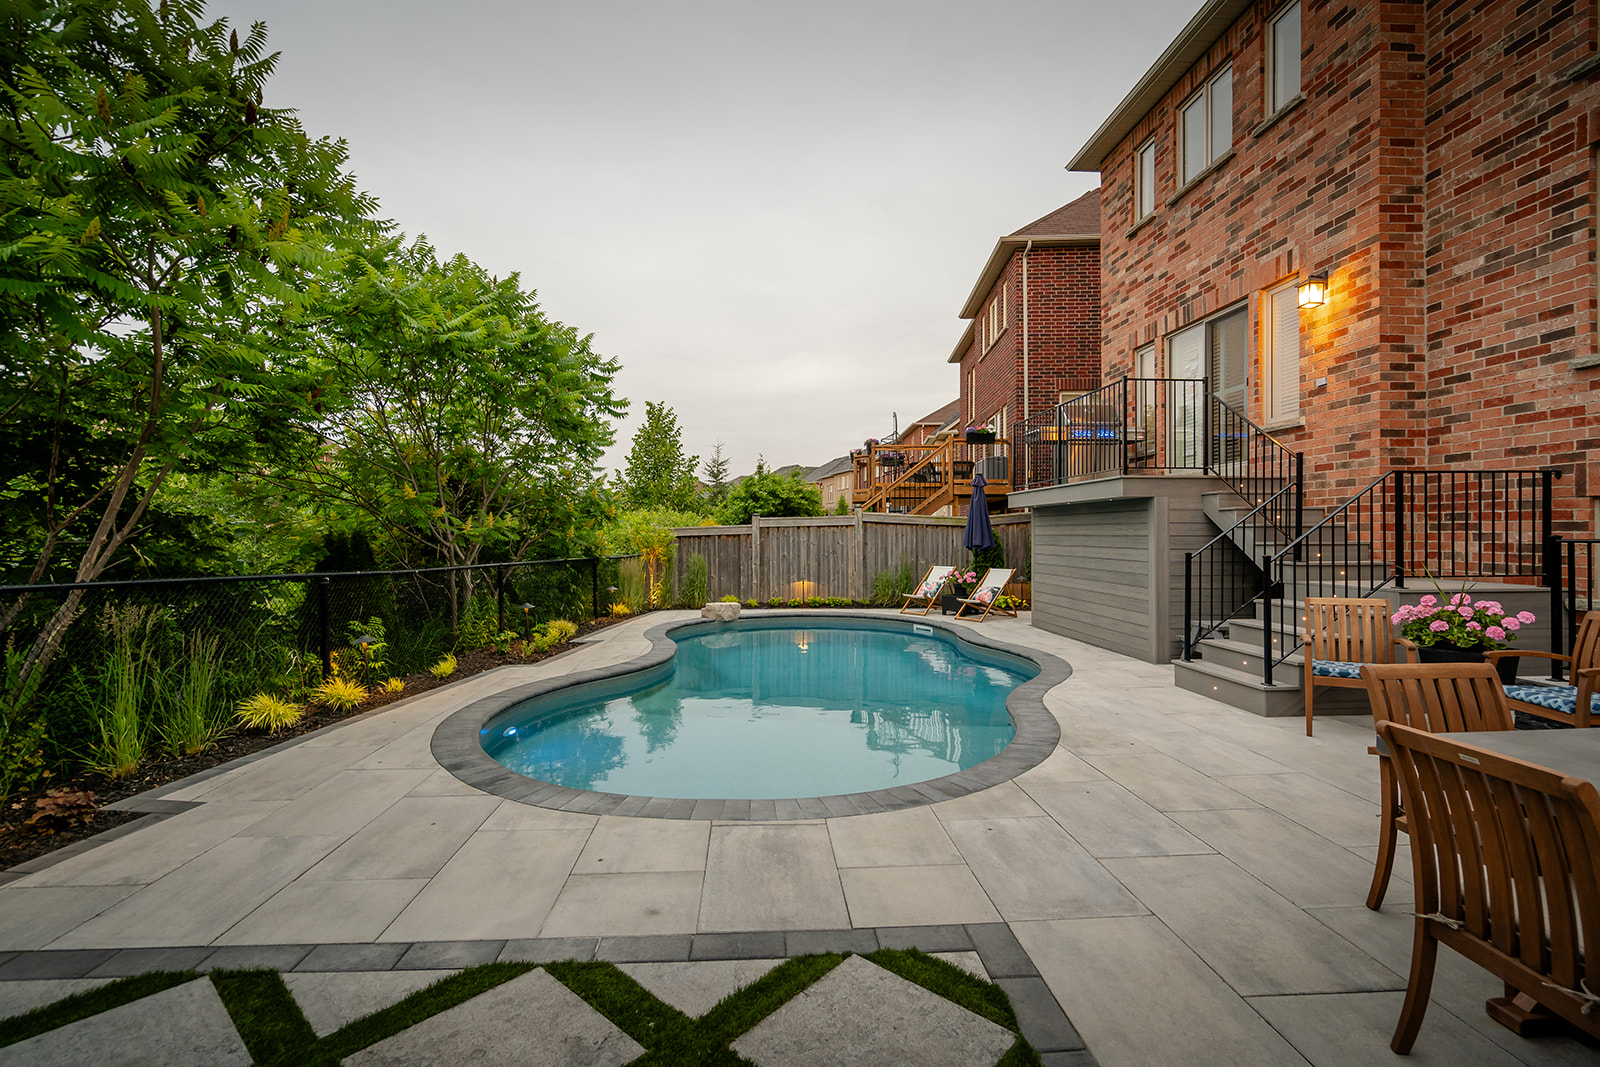 An inground pool in the middle of the yard with patio stones surrounding.